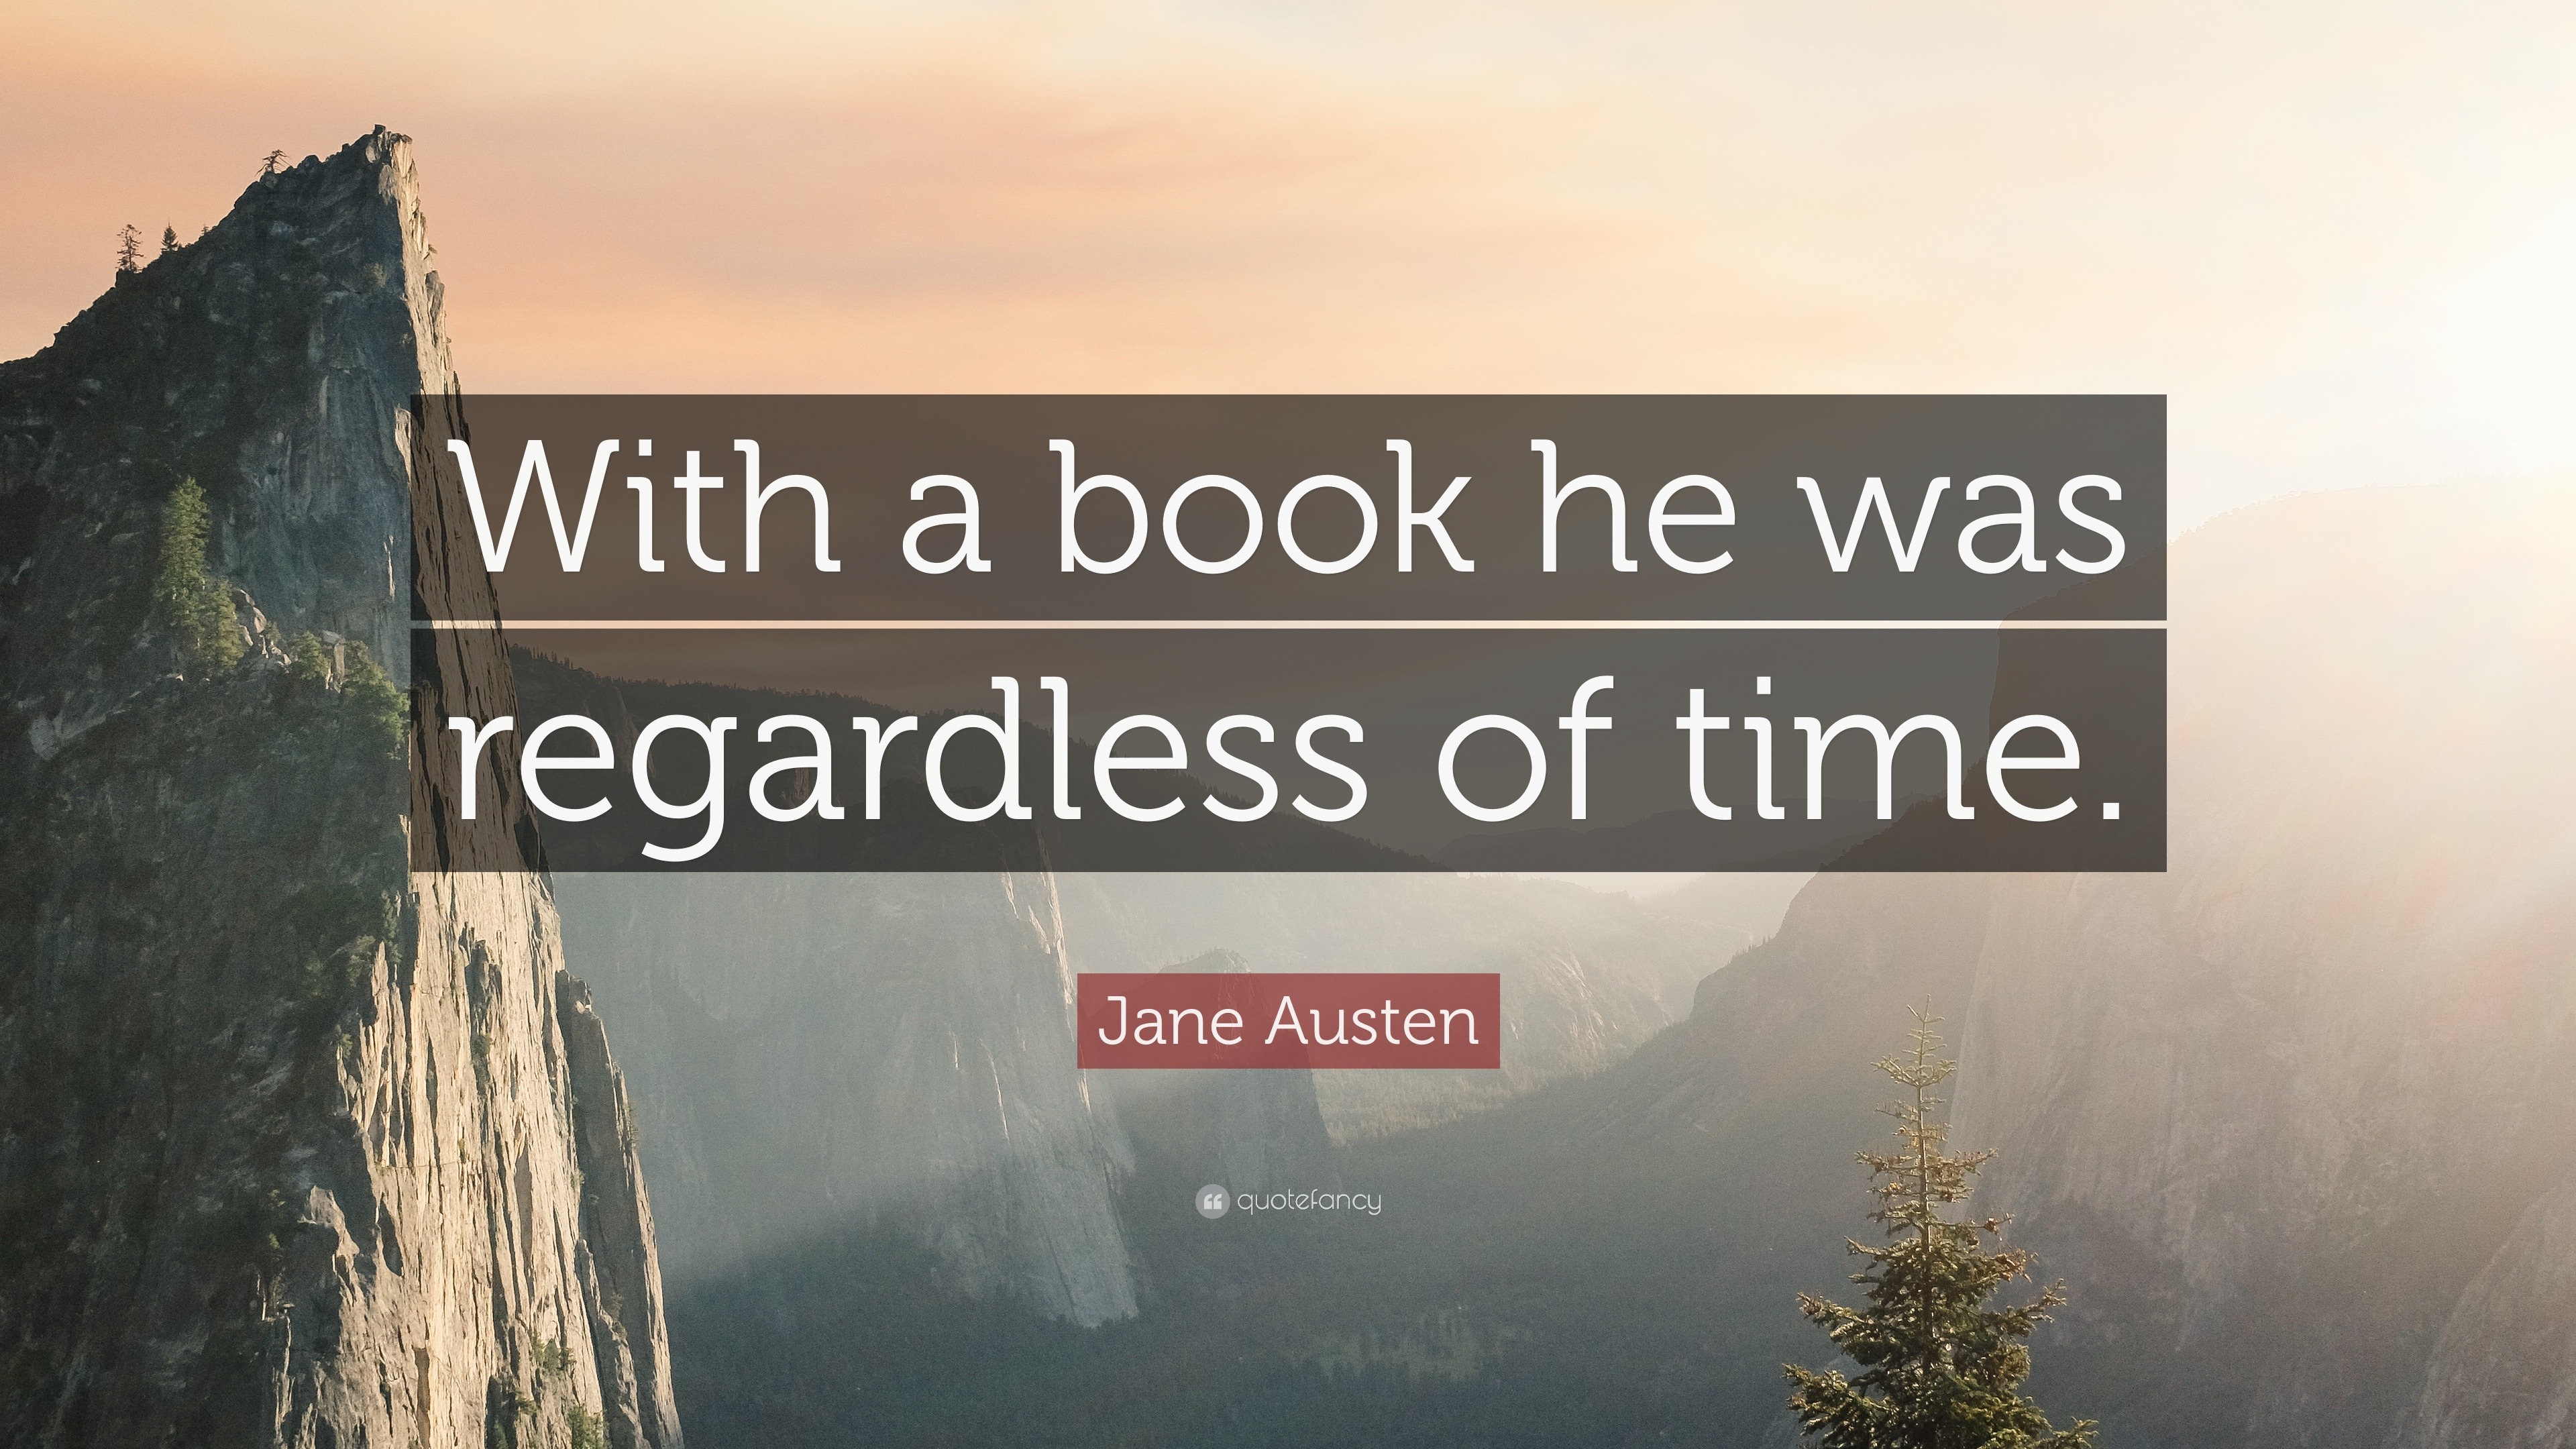 Jane Austen Quote: “With a book he was regardless of time.” (12